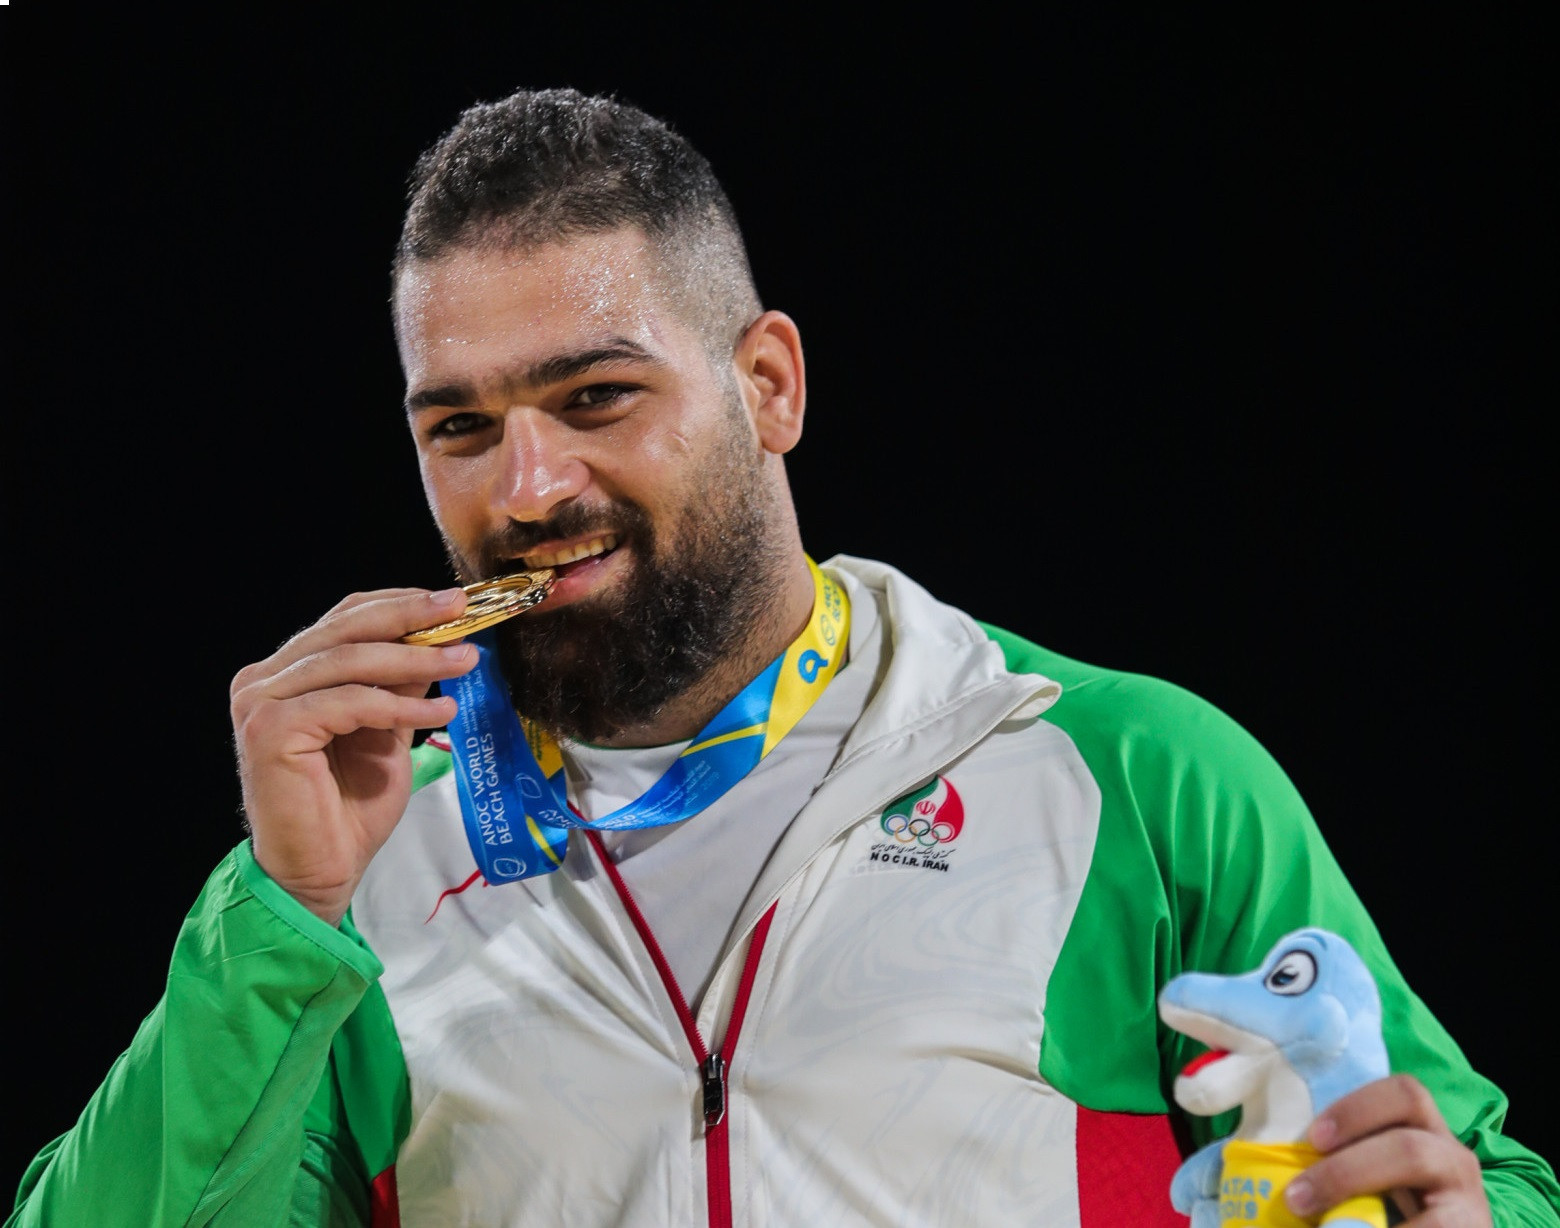 ANOC has confirmed Pouya Rahmani will be stripped of his gold medal ©ANOC